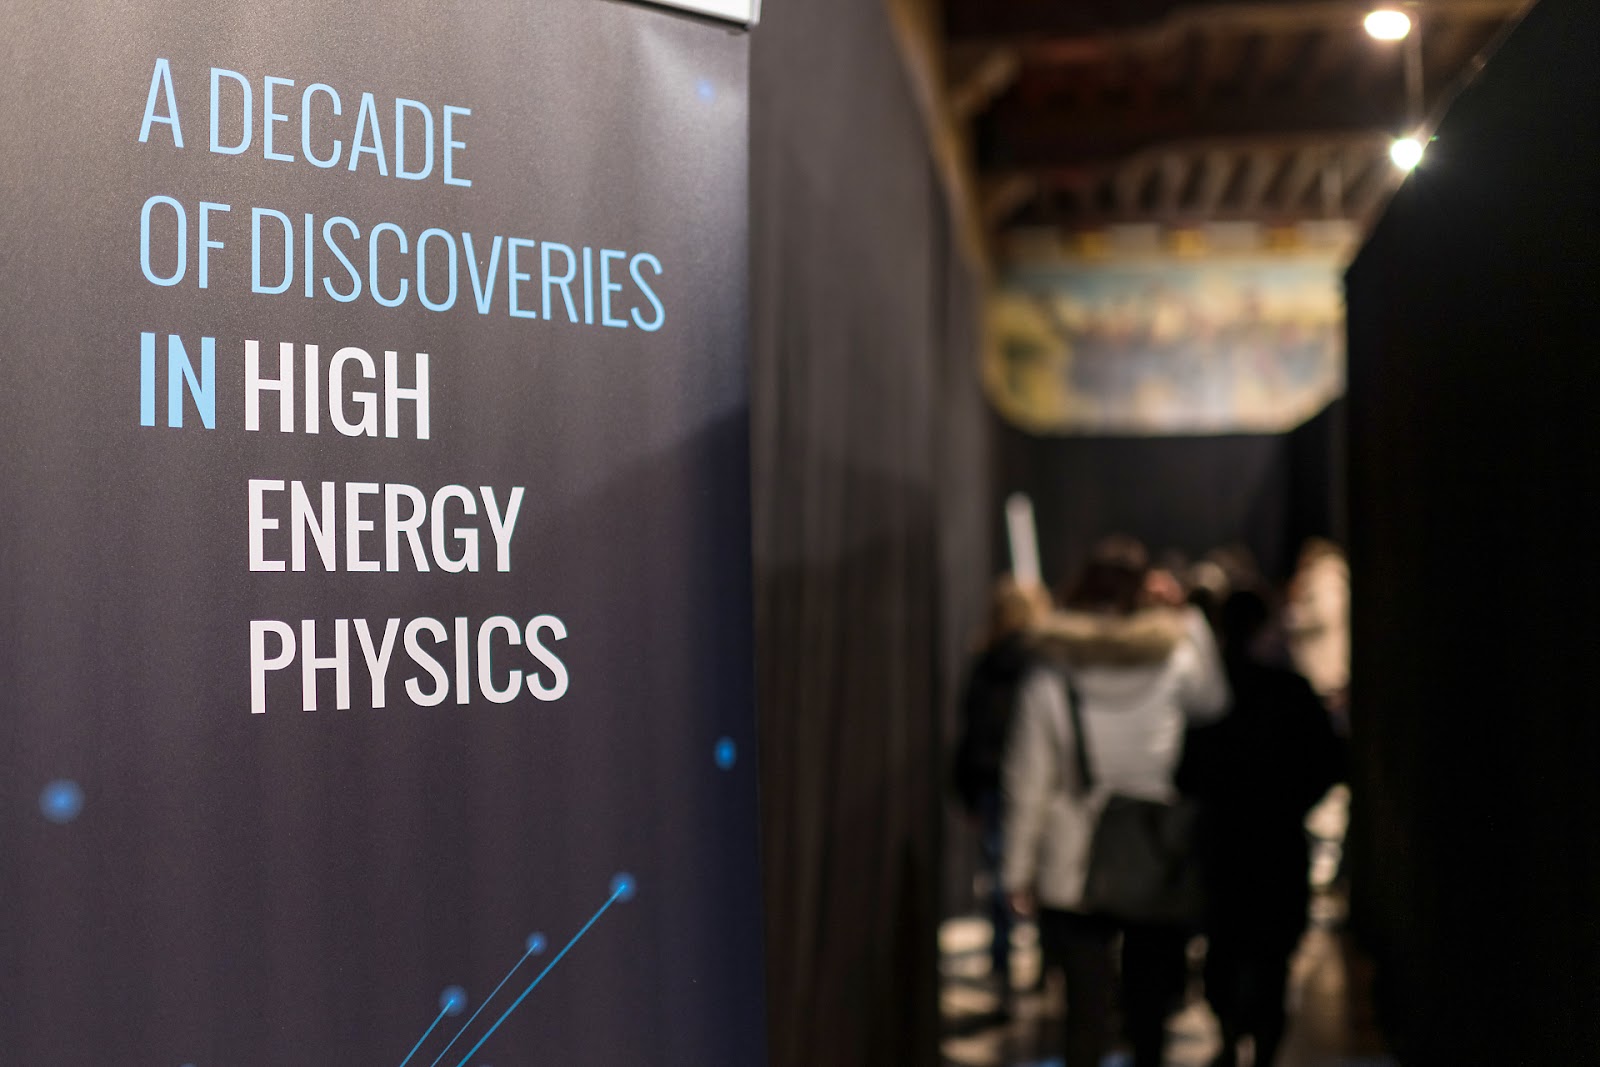 Poster of the A Decade of Discoveries in High Energy Physics symposium held in Brussels, Belgium [Photo by Aurore Delsoir]